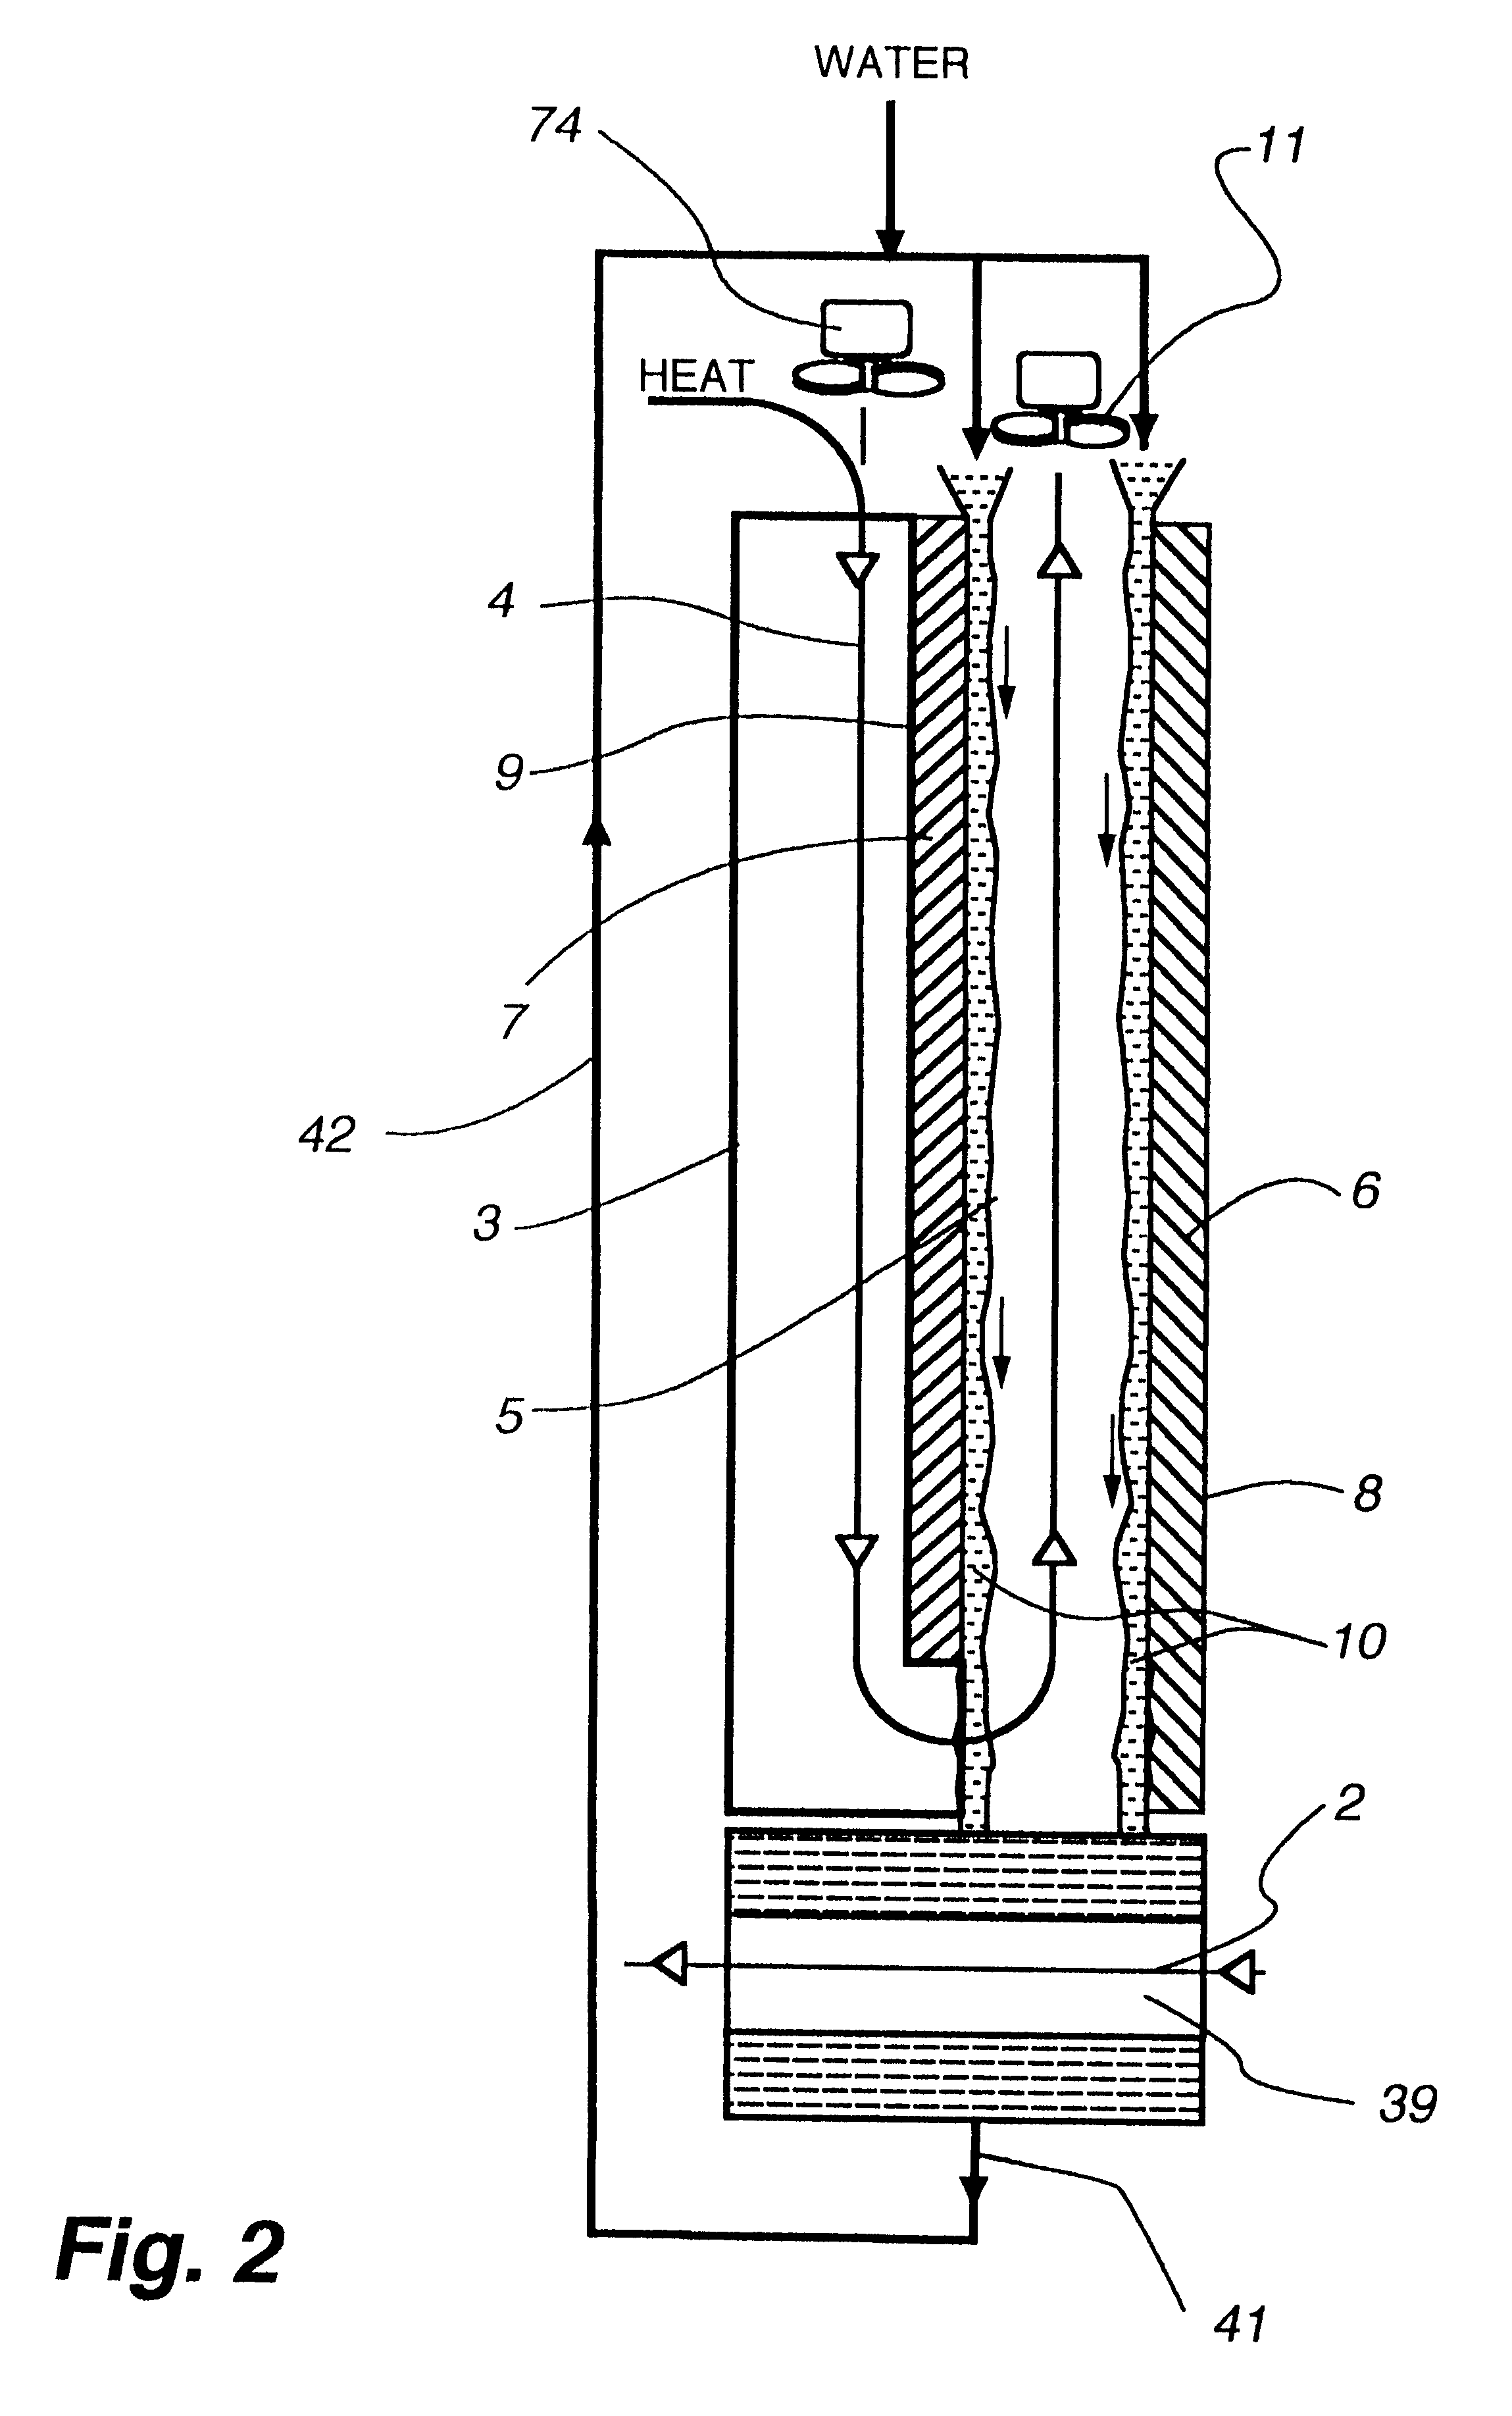 Method and apparatus of indirect-evaporation cooling